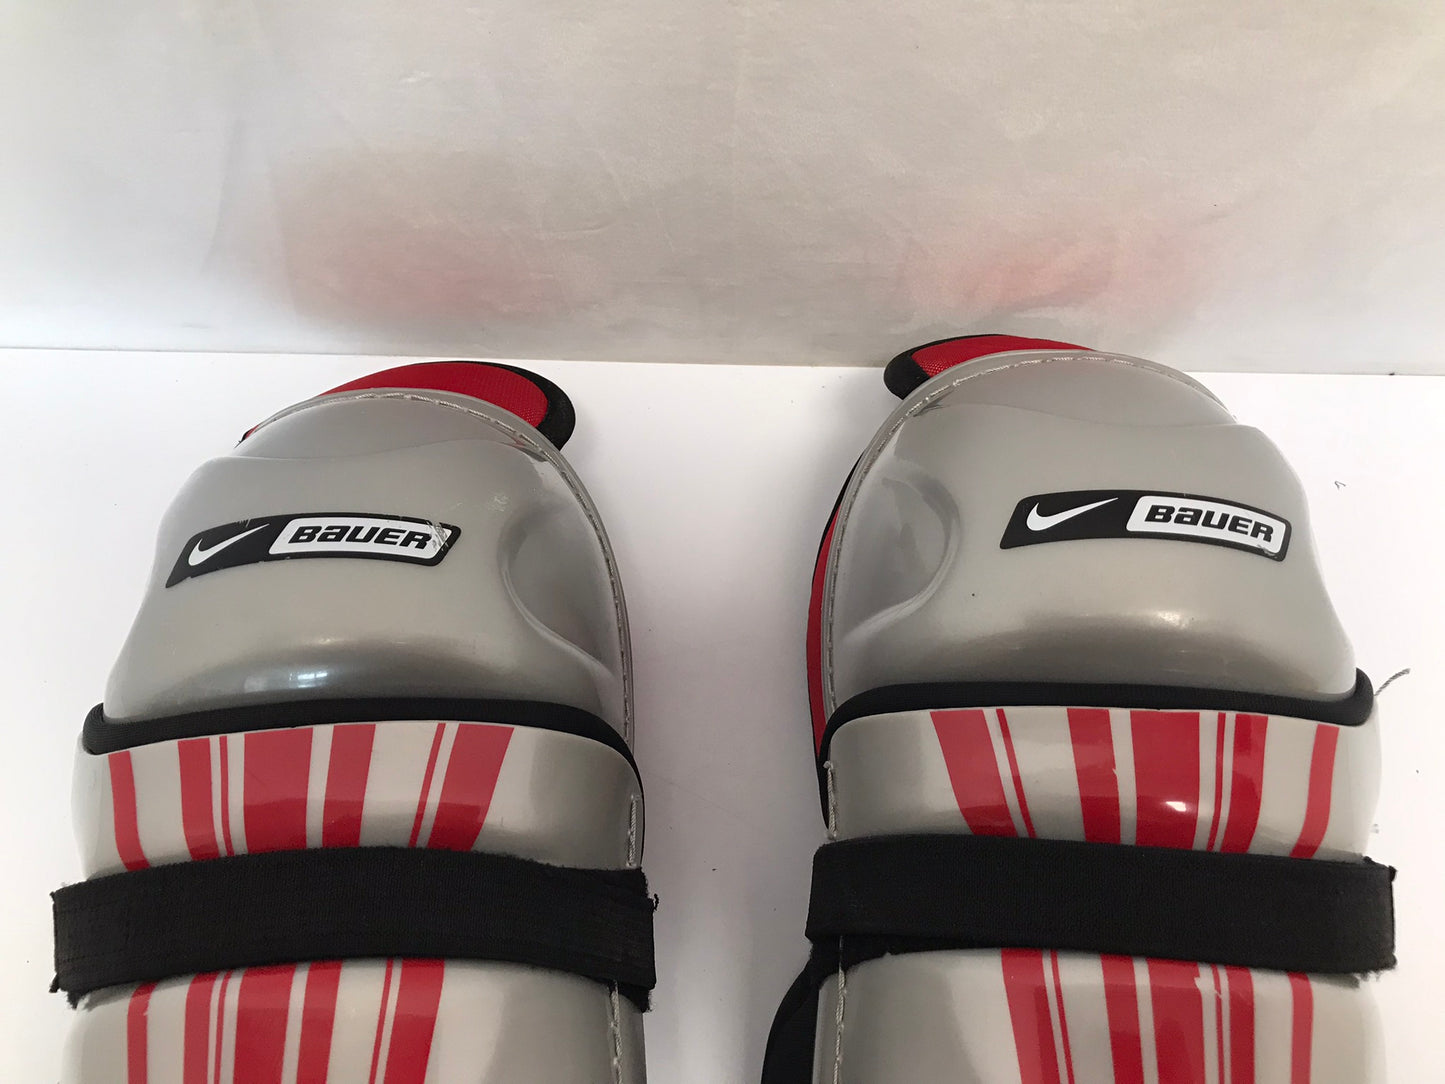 Hockey Shin Pads Men's Size 15 inch Bauer Nike Grey Red Excellent